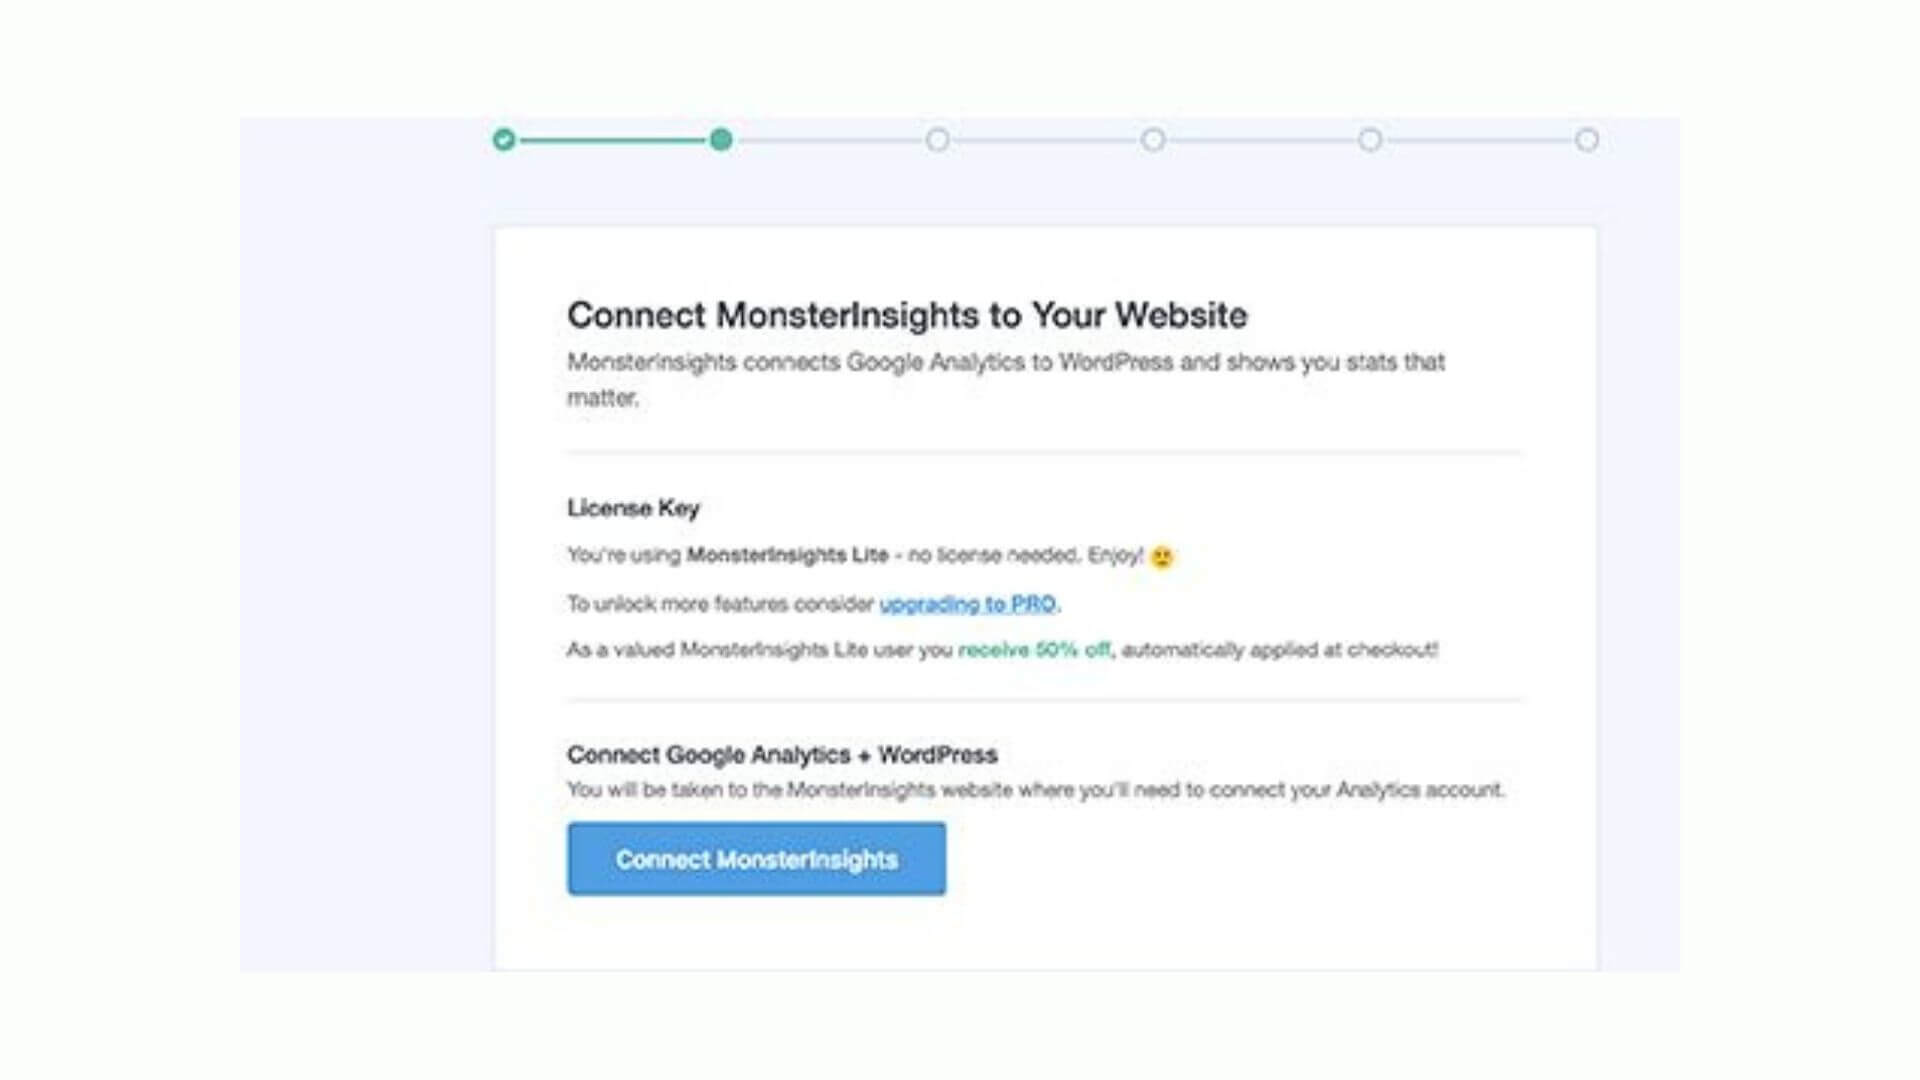 Connect MonsterInsights to your website